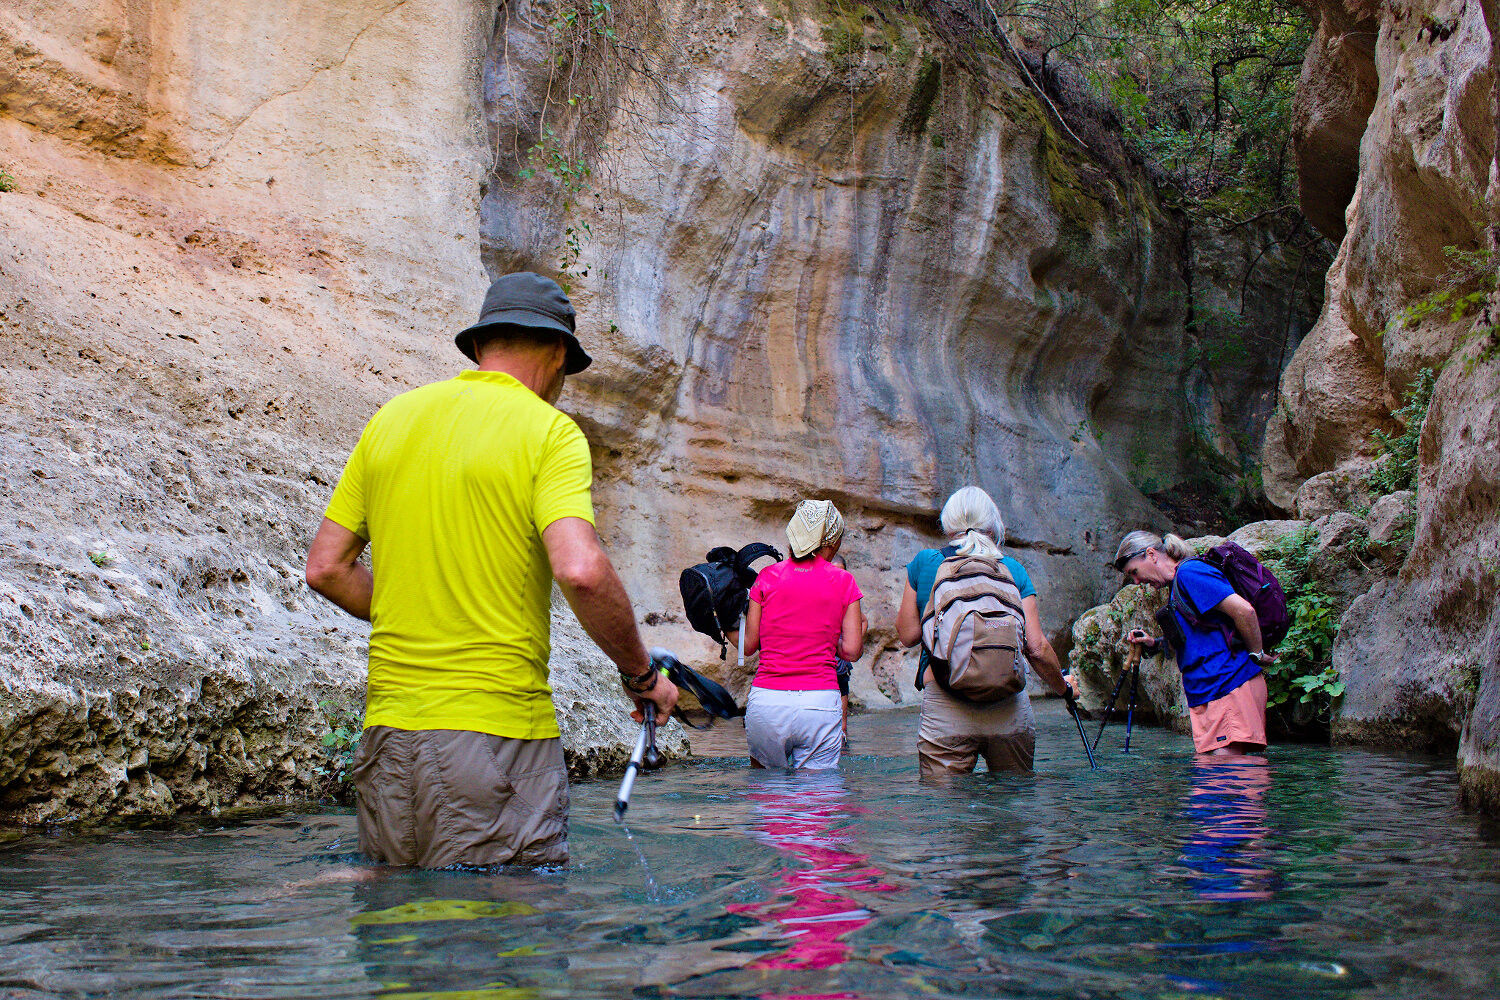 A group of people wade through a water filled gorge